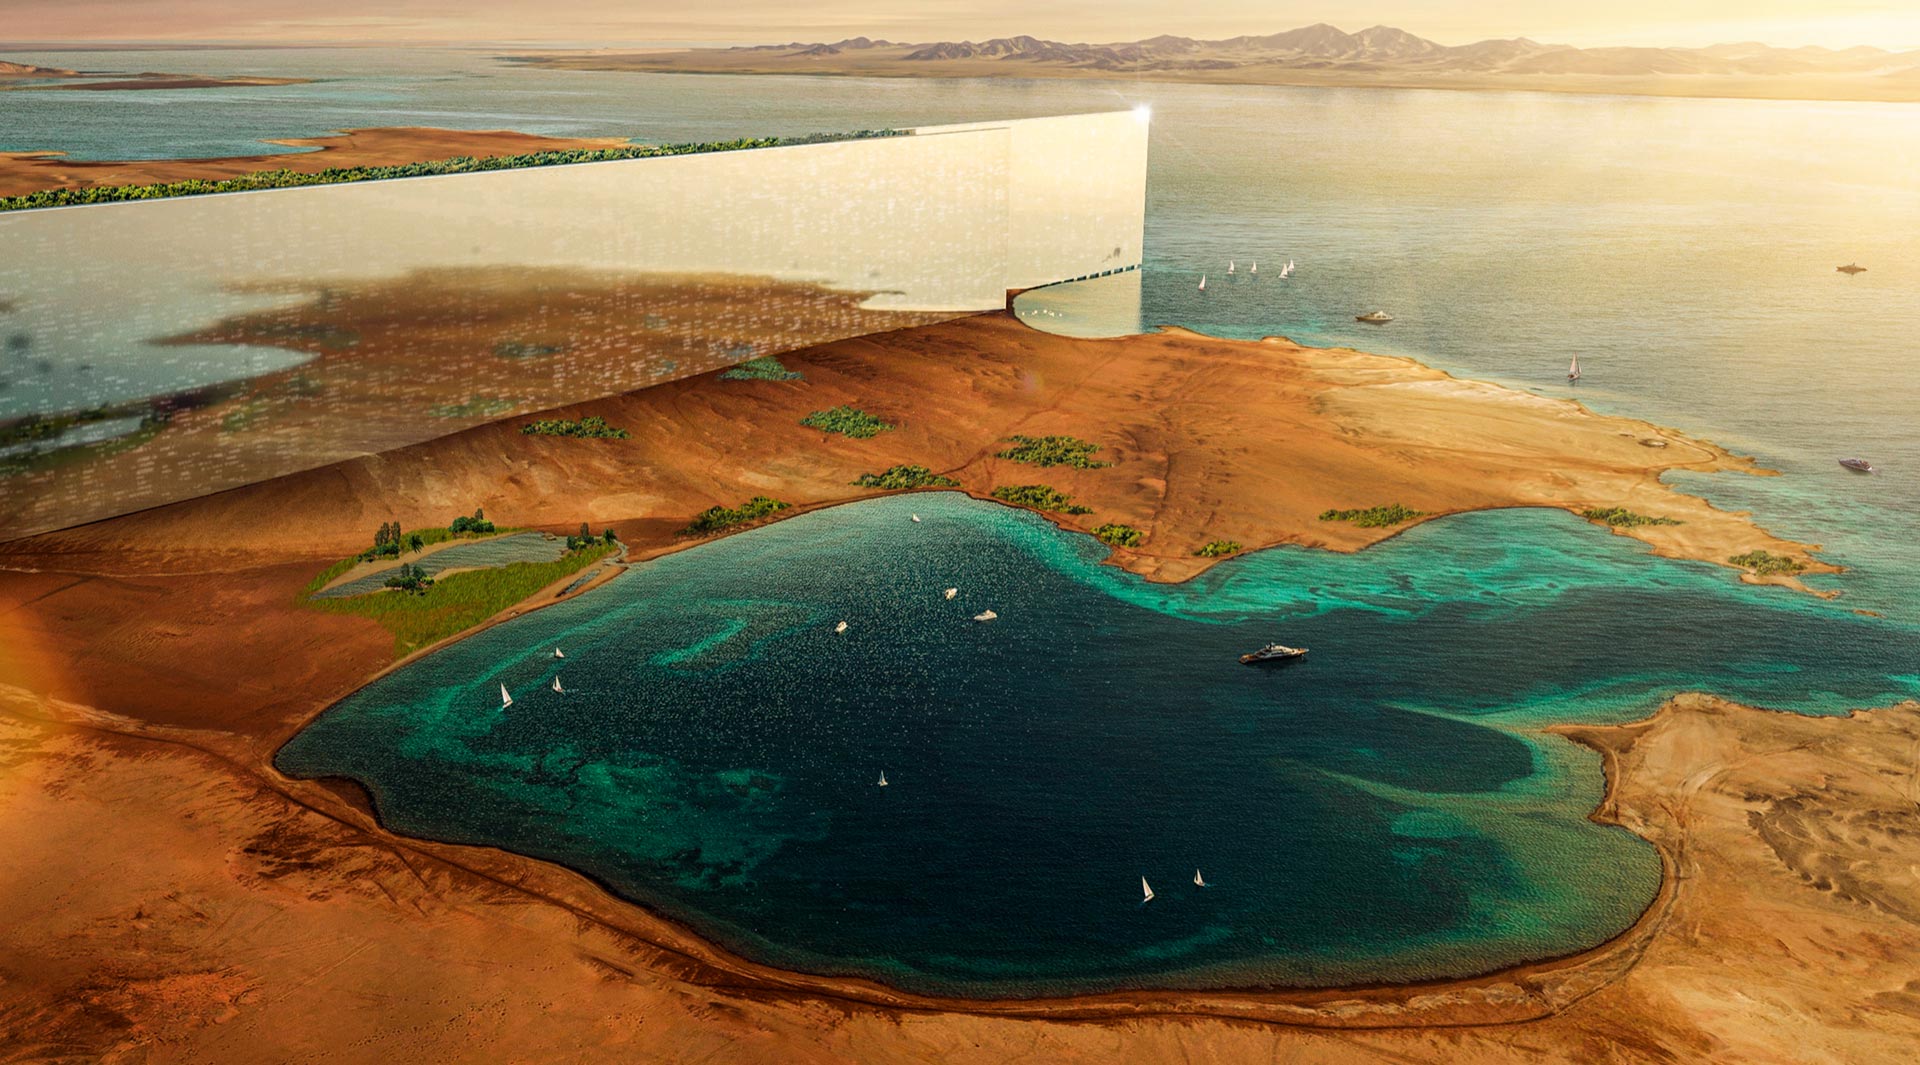 The LINE, one of sub-projects under NEOM, the $500 billion USD Saudi's giga project.